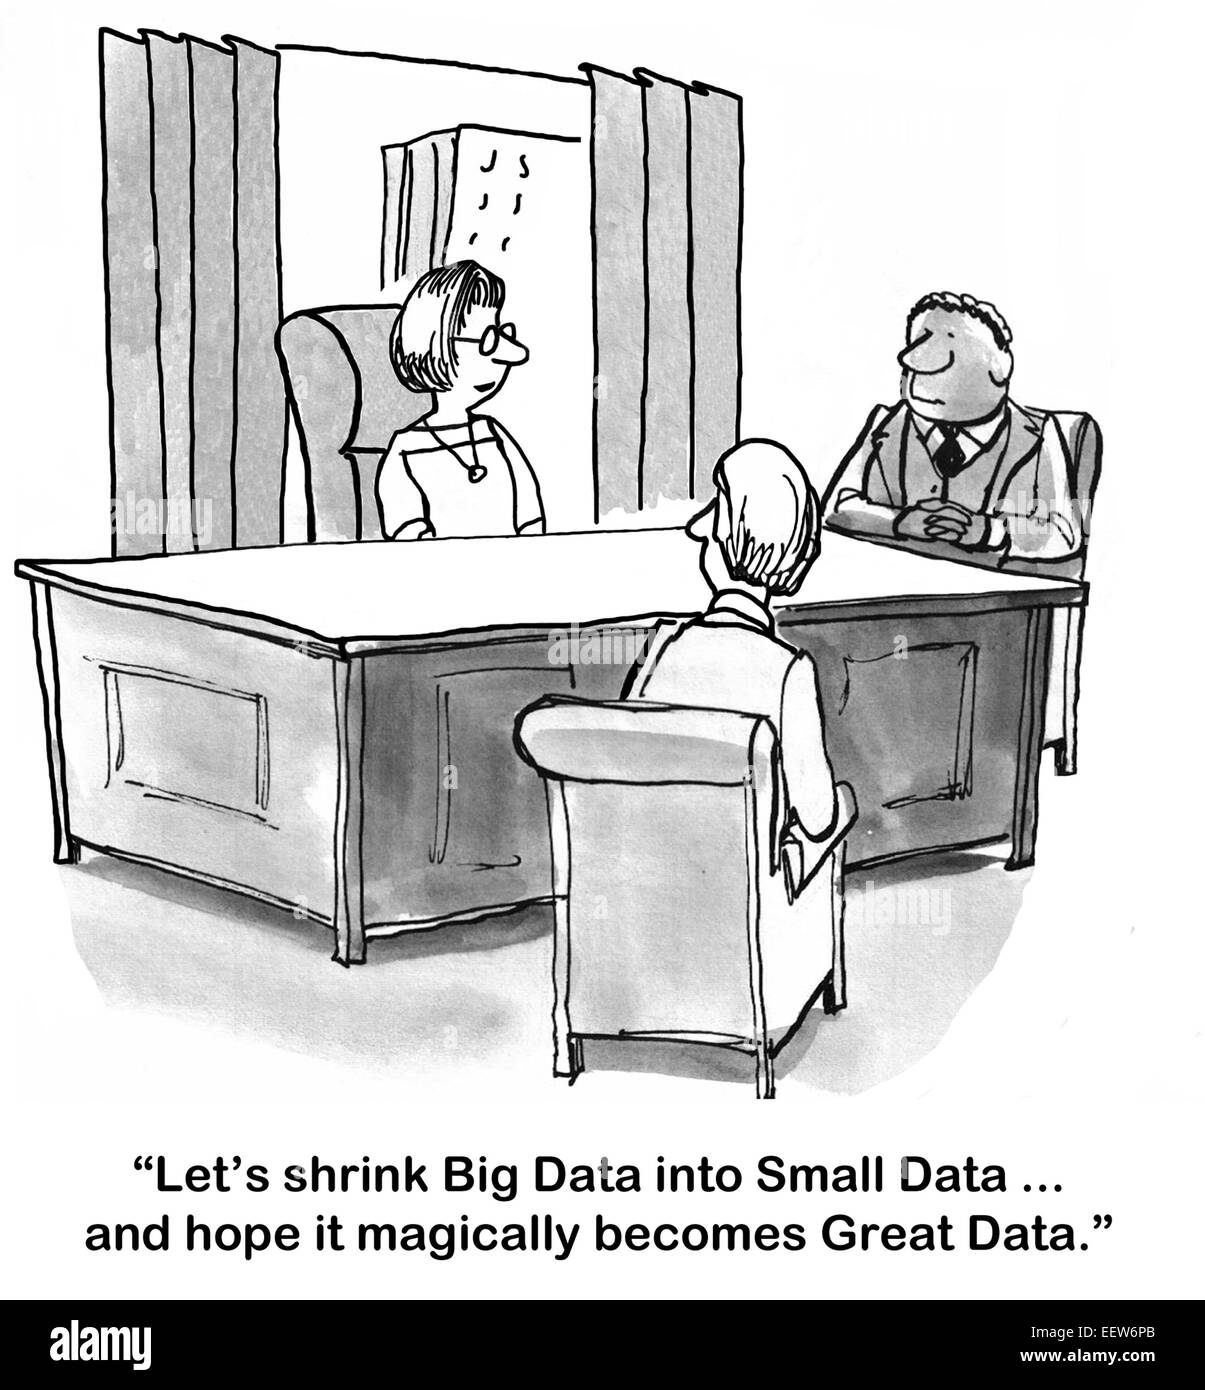 Cartoon of business people talking about big data and the need to shrink it to small data so it becomes great data. Stock Photo